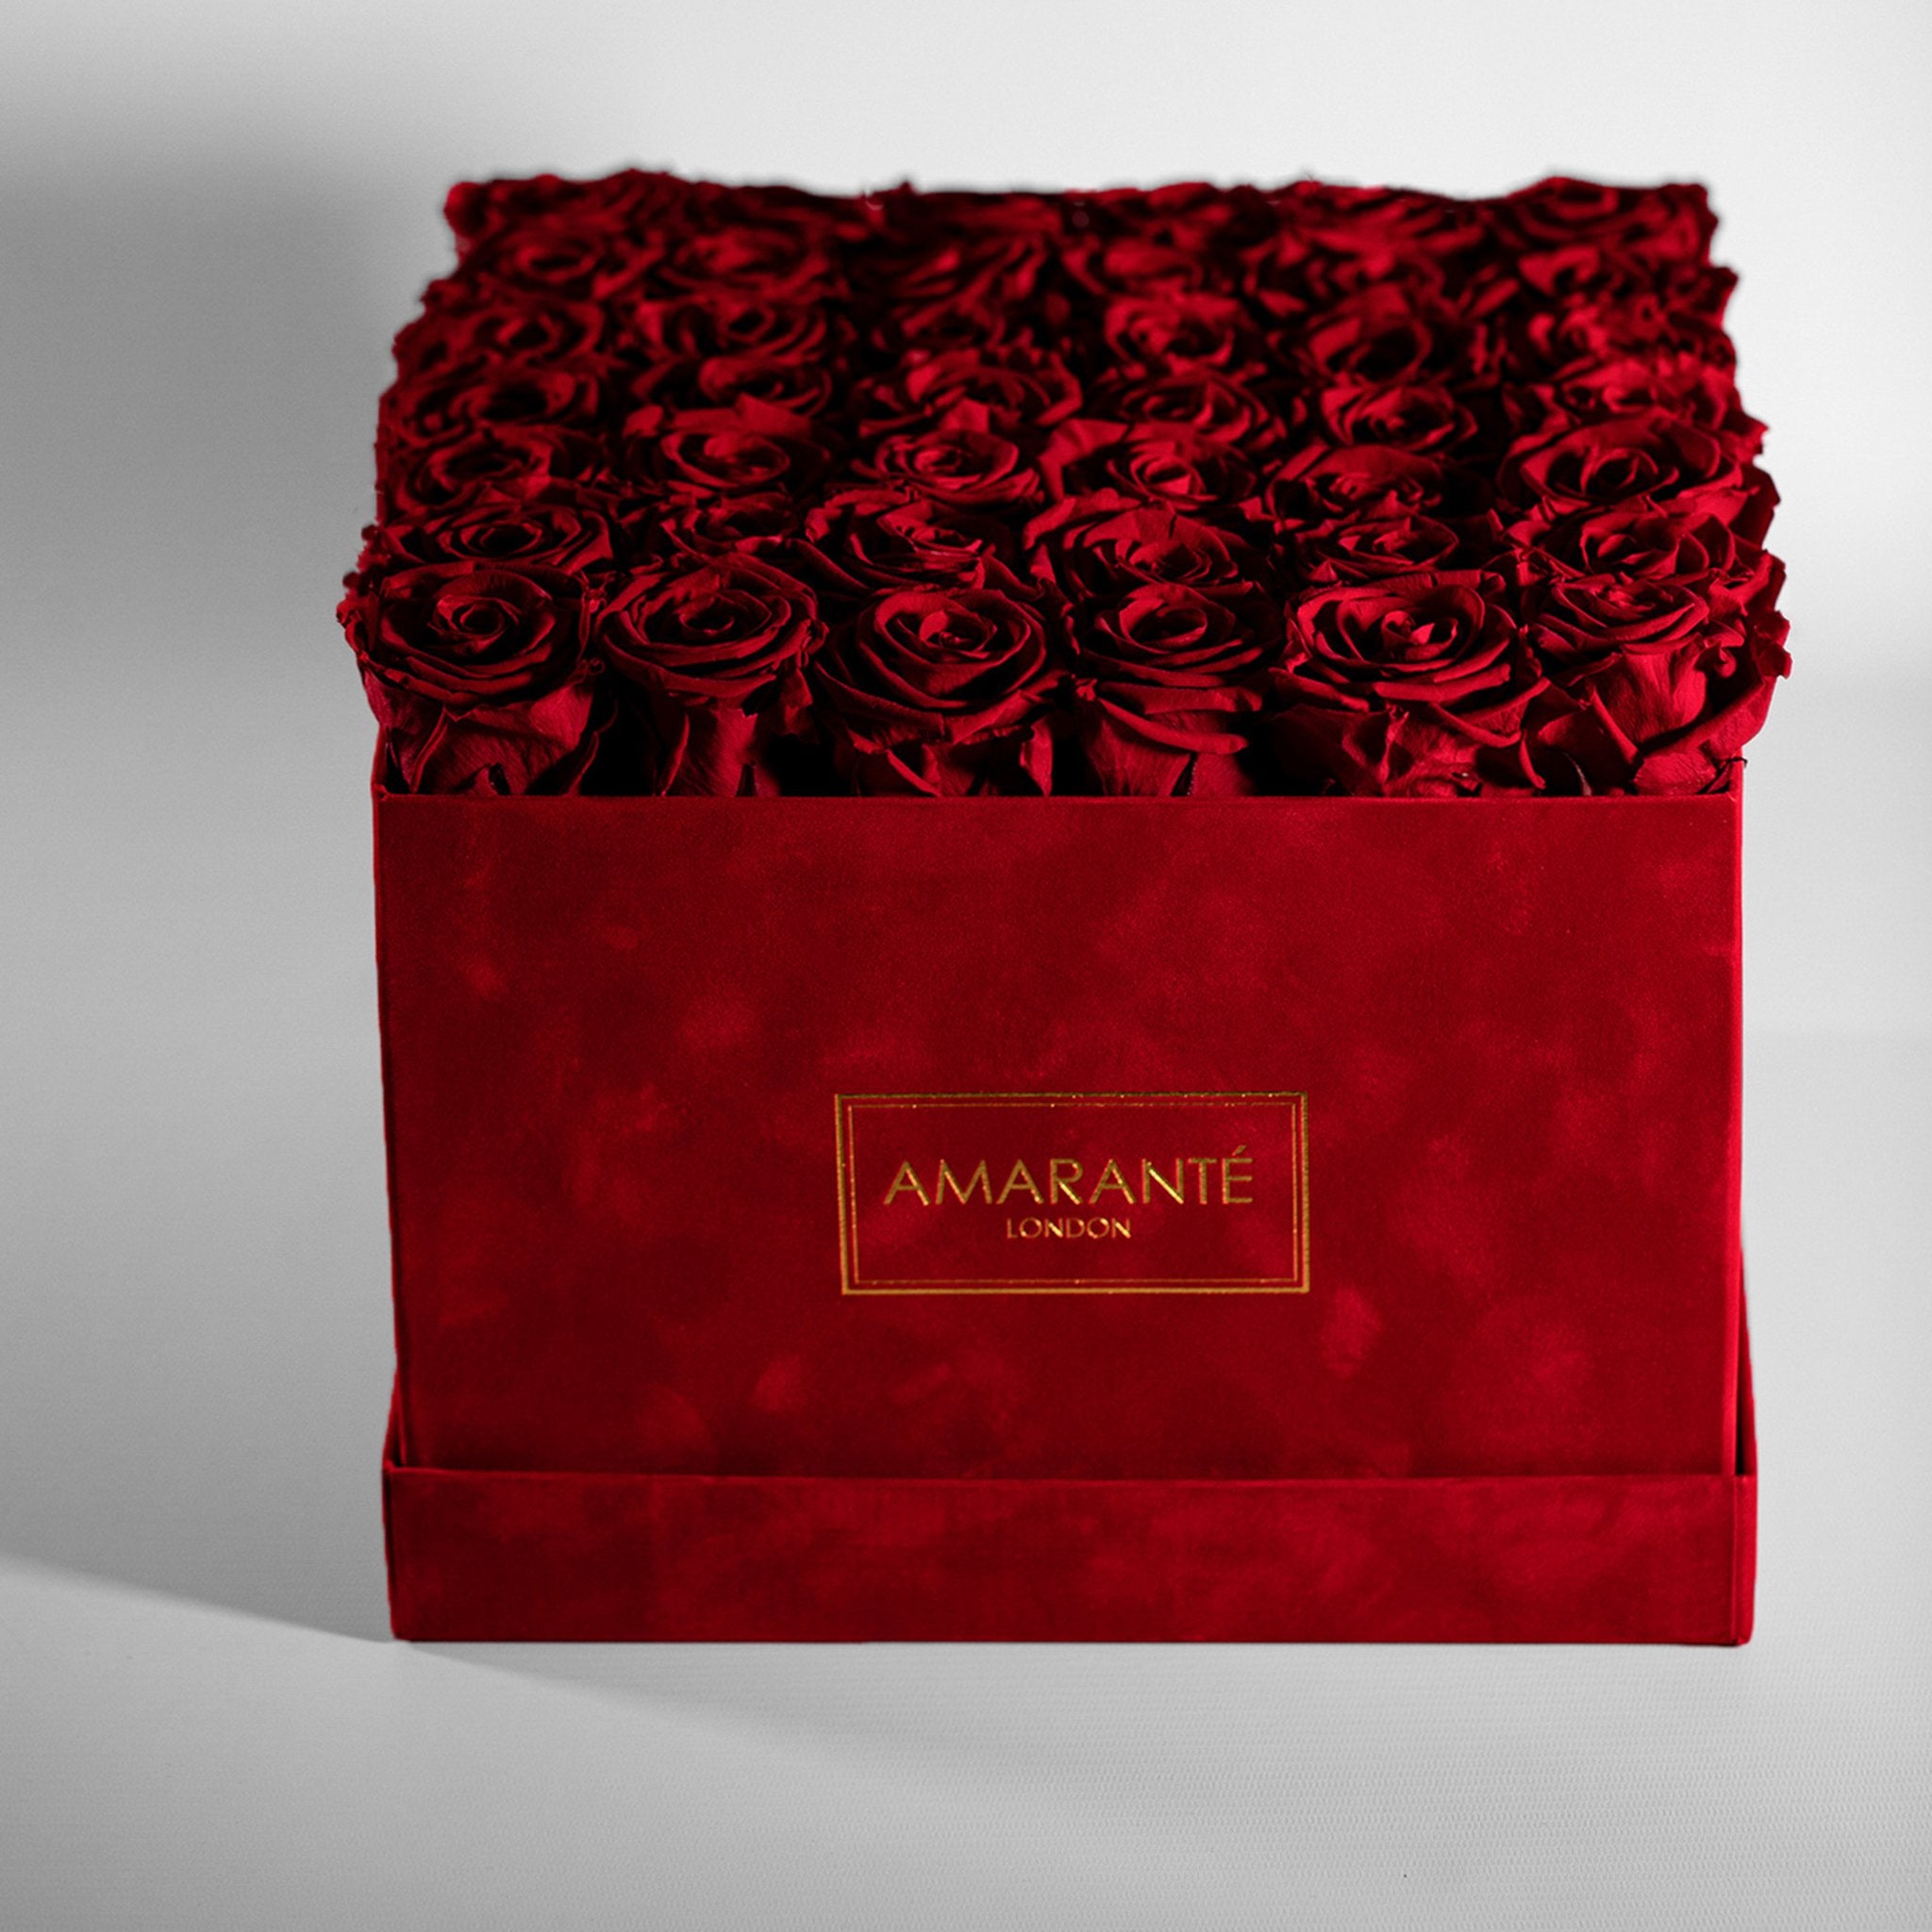 Divine red roses embedded in a fiery red box in extra large and square size 